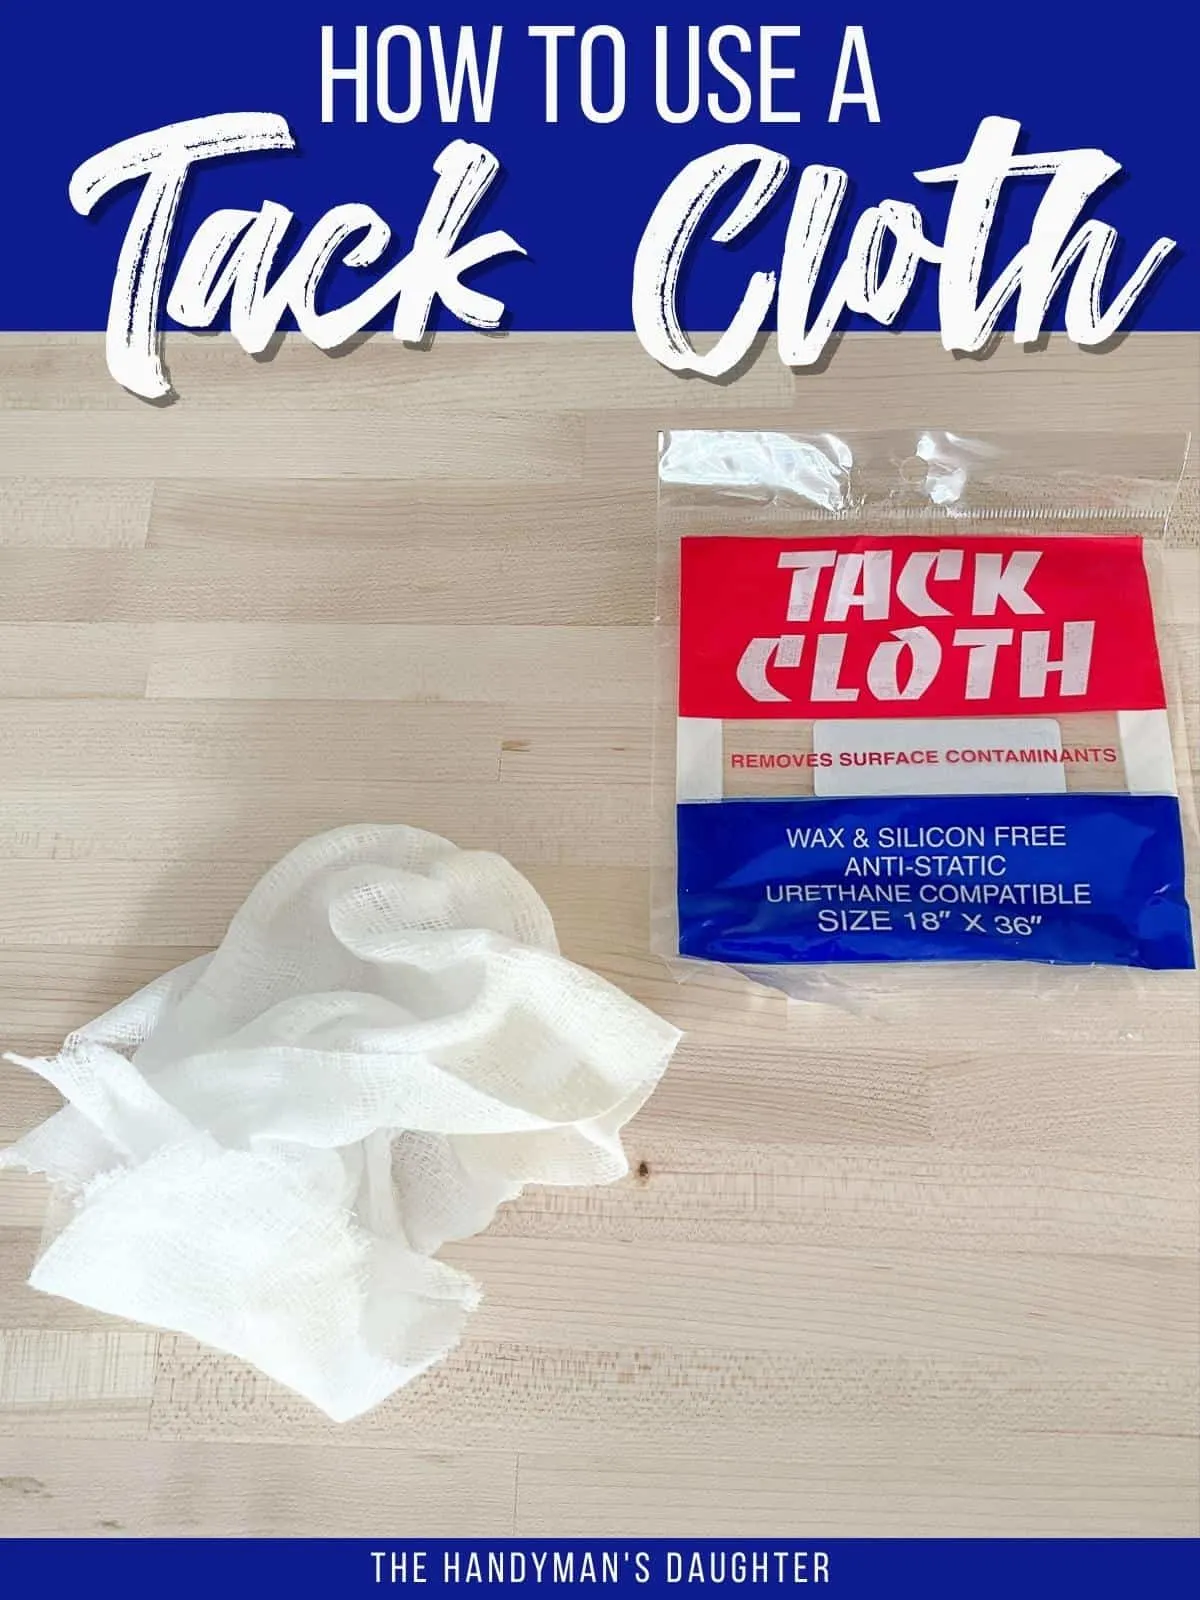 What is Tack Cloth and How Do You Use It? - The Handyman's Daughter